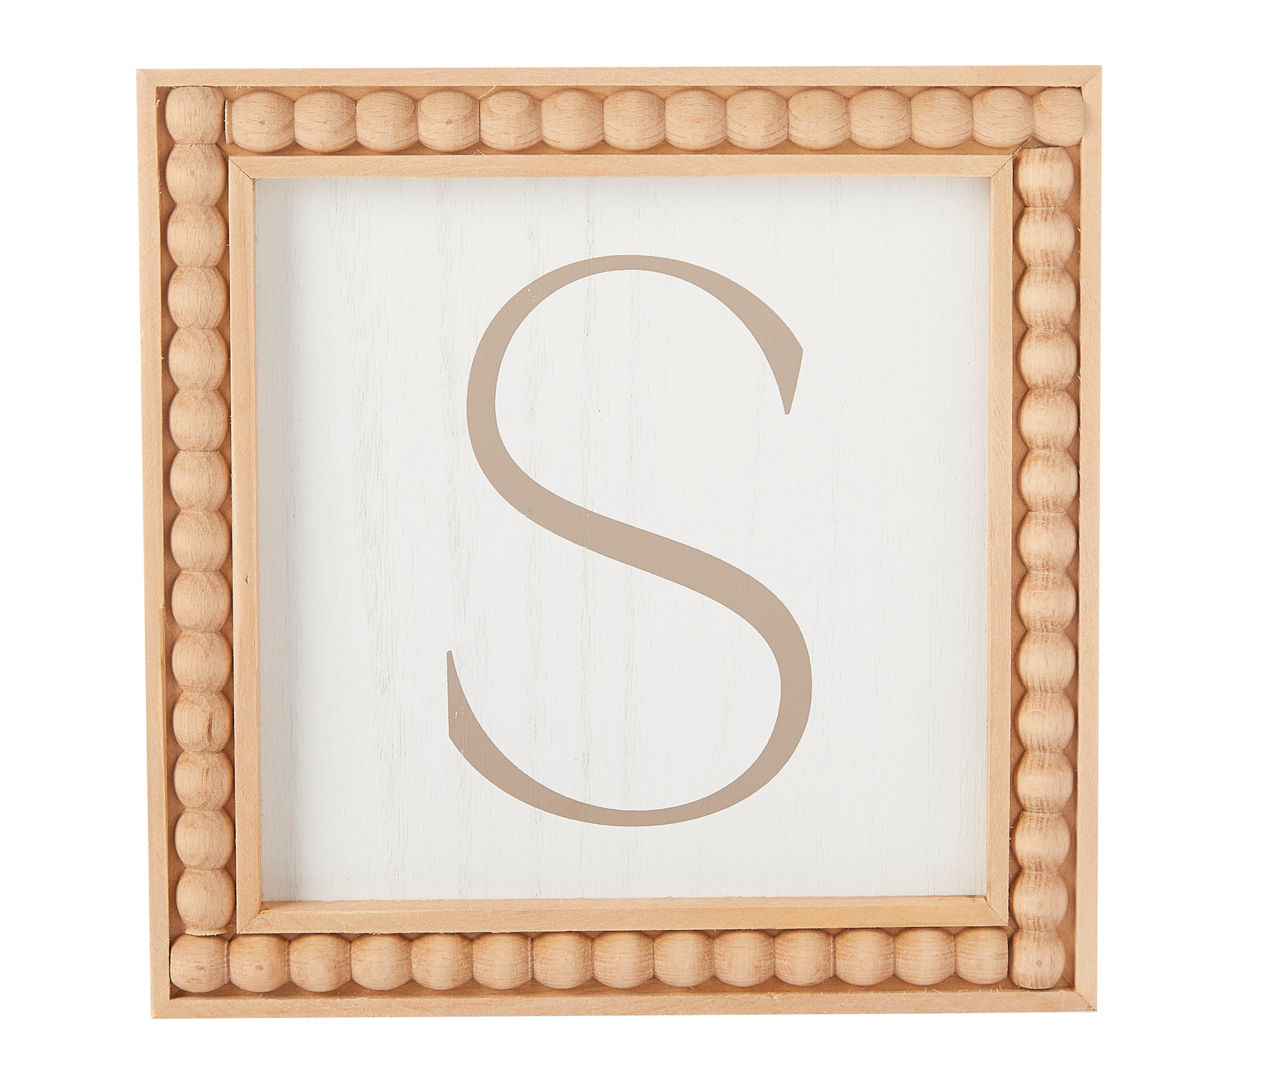 "S" Brown & White Wood Bead Framed Wall Plaque 